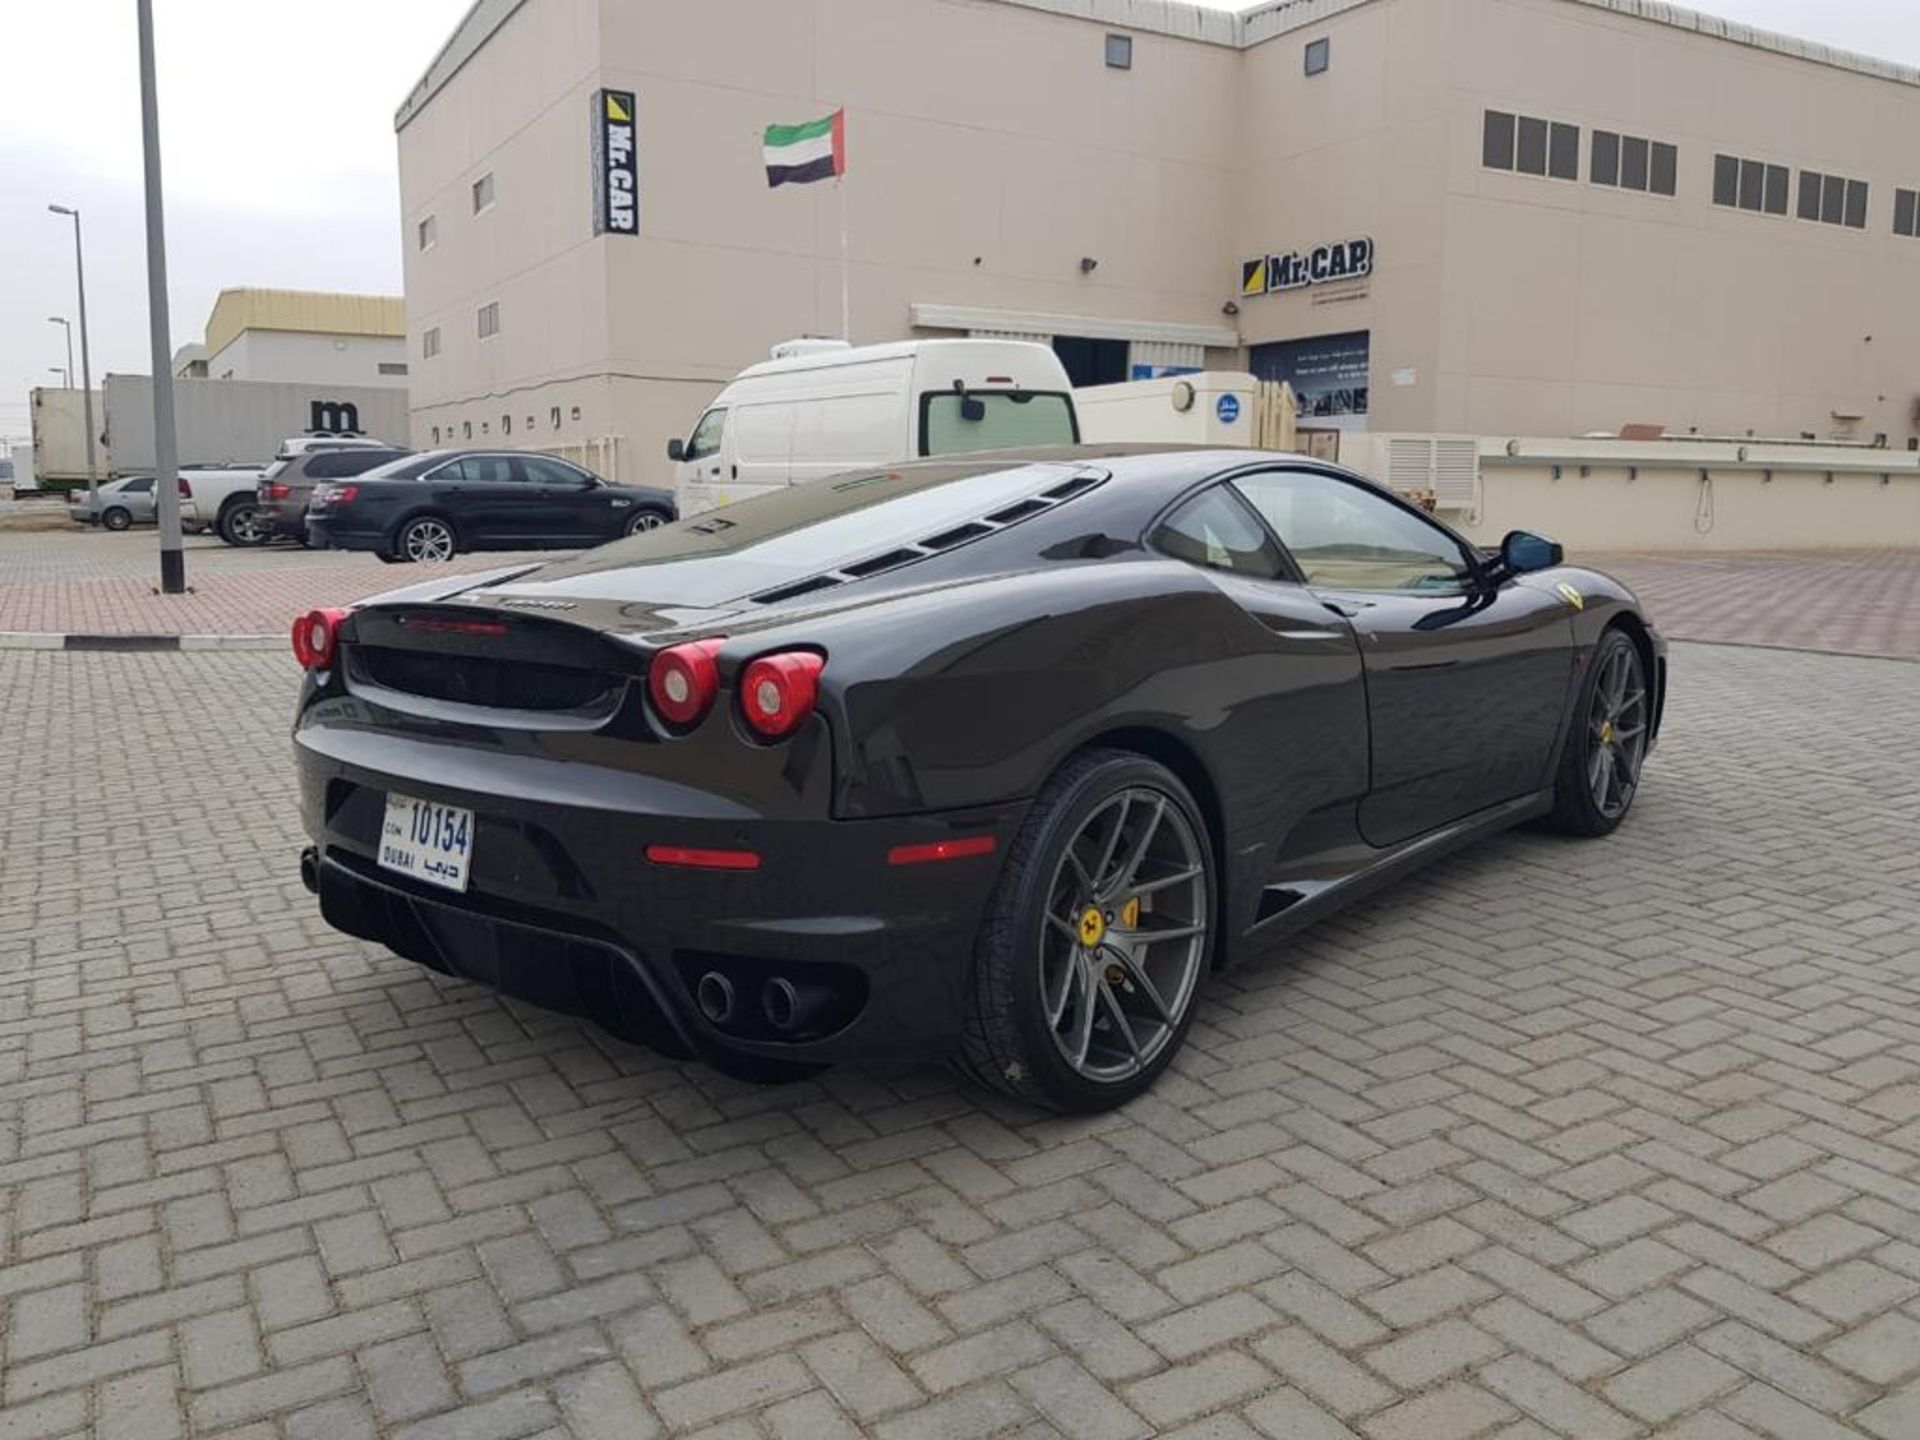 2007 FERRARI F430 BLACK 2 DOOR COUPE 4.3L AUTOMATIC LHD, PERFECT CONDITION INSIDE AND OUT - Image 8 of 13